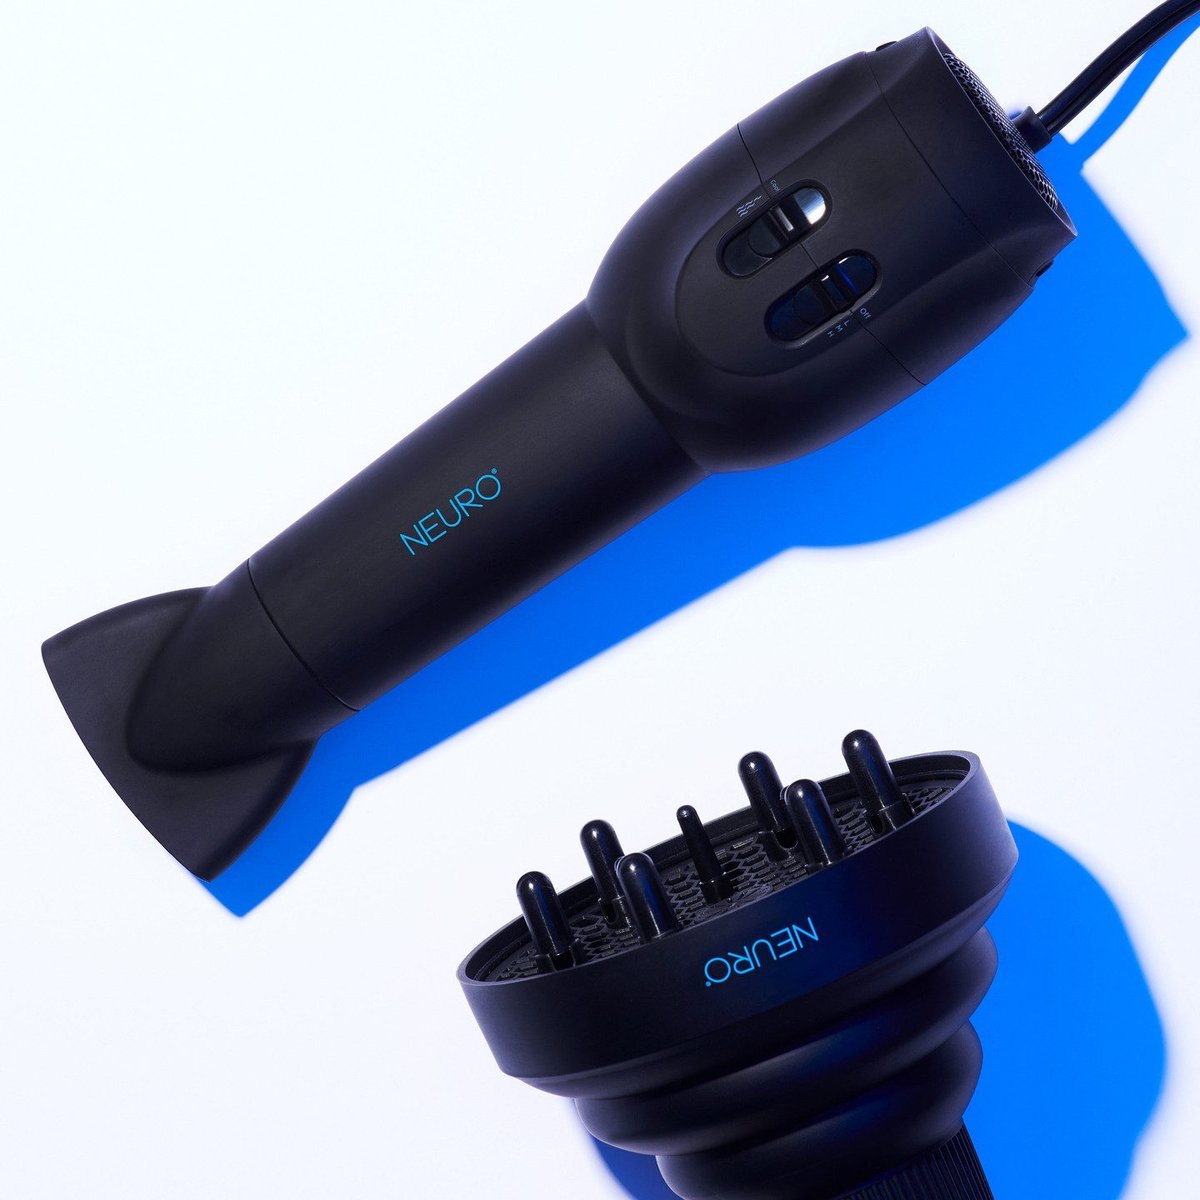 Get a GRIP on maximum styling with the #NeuroHair Grip Dryer + Diffuser 💙 Perfect for perfecting your gorgeous natural curls 🤩 The handle-free, ergonomic design allows for the ultimate comfort and control for effortless styling! ✨ #curlyhair #blowdryer #diffuser #healthyhair